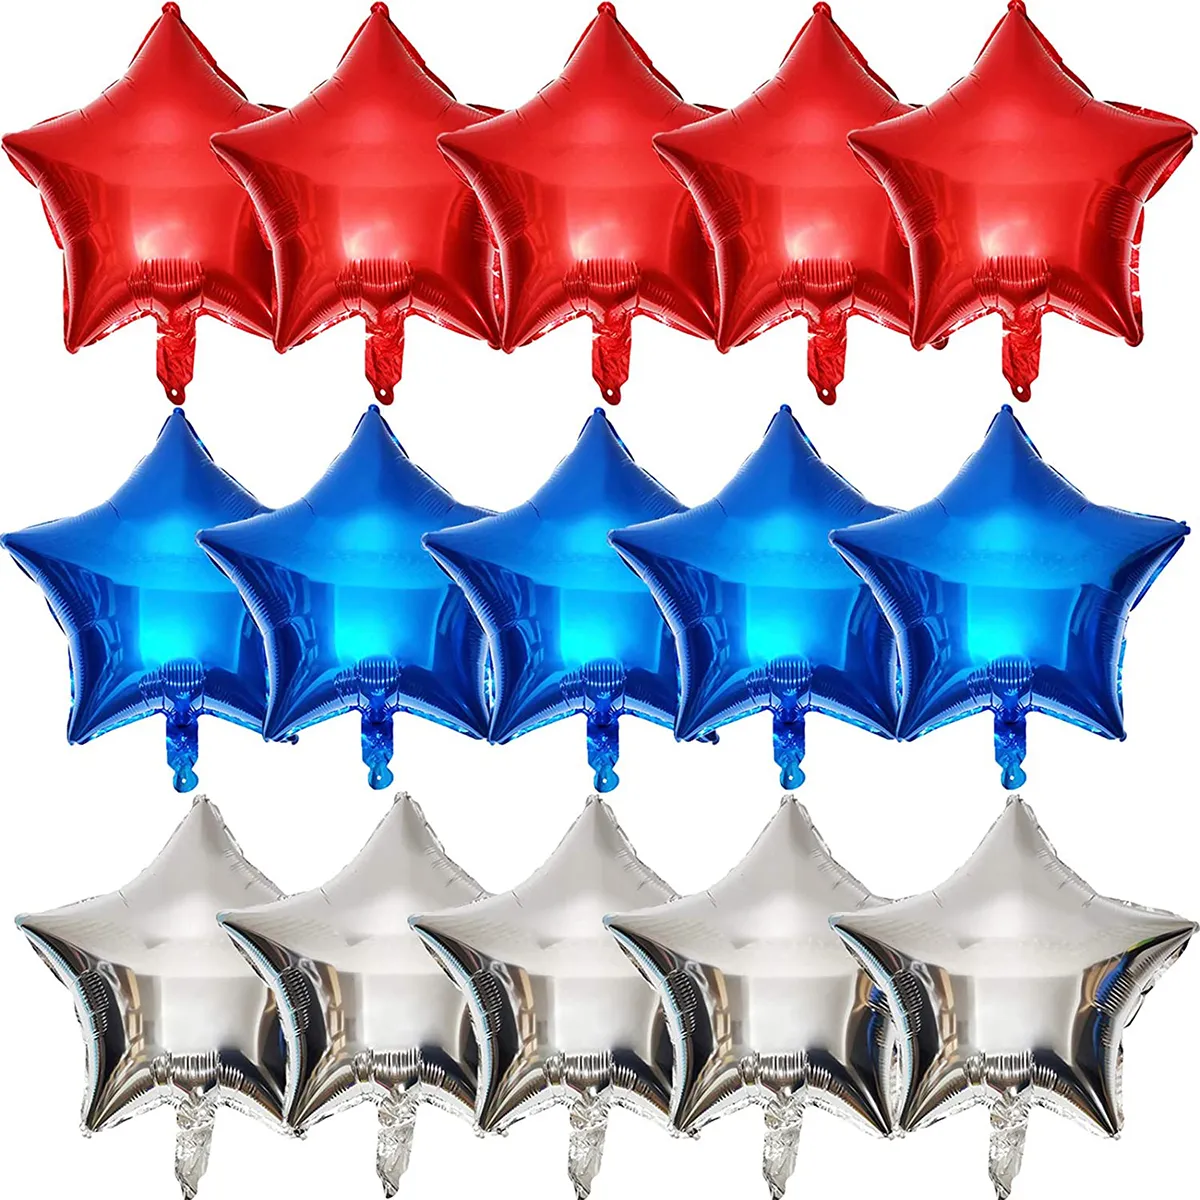 

15pcs Red Silver and Blue USA Flag Foil Balloon Star Shaped for Independence Day Party Favours